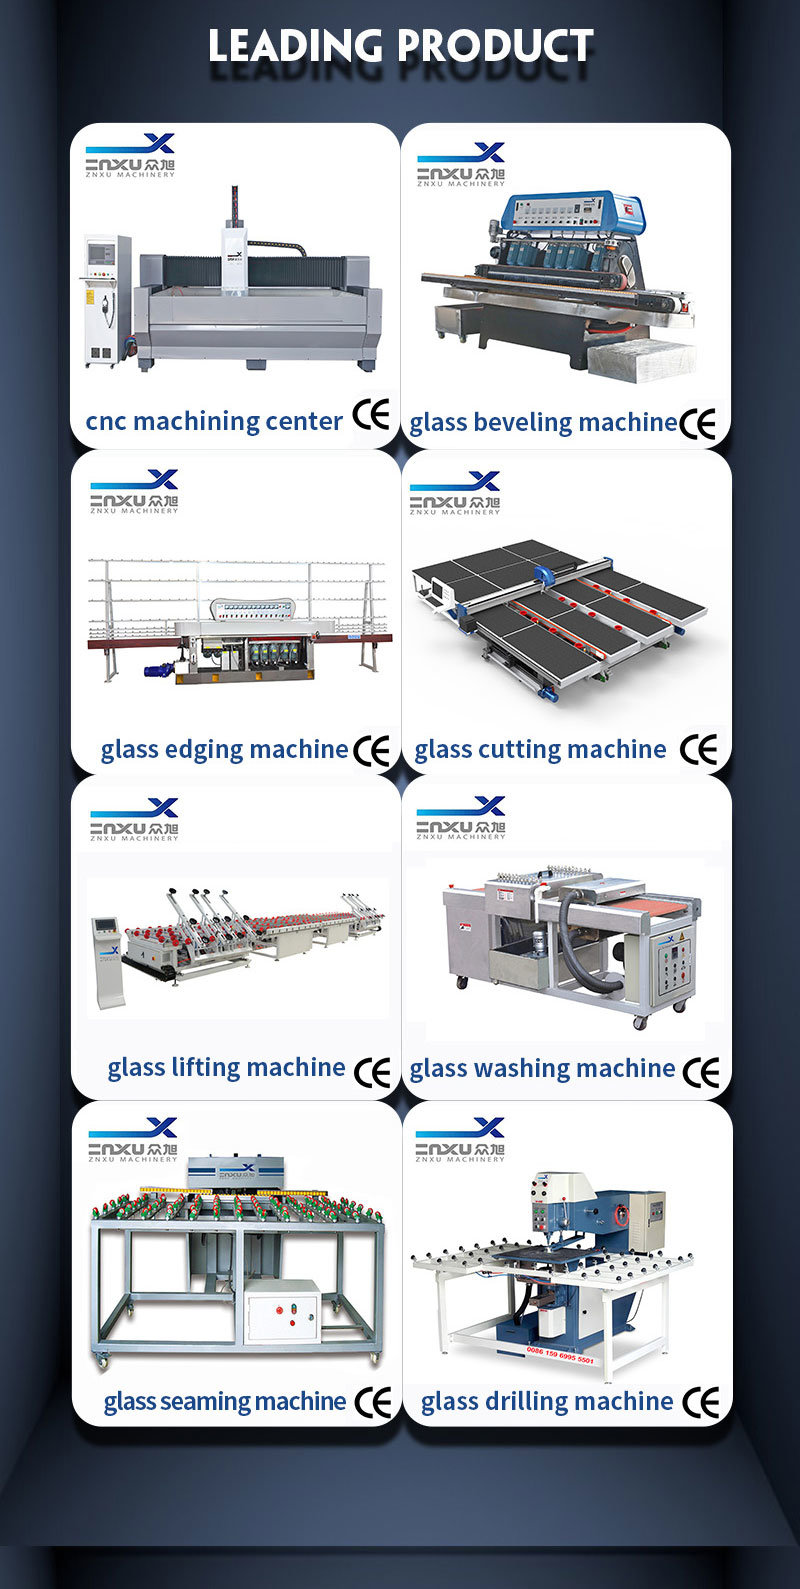 Chinese Manufacturer Zxx-C3018 CNC Glass/ Acrylic/Ceramic Tiles/Rock Plates Working Center